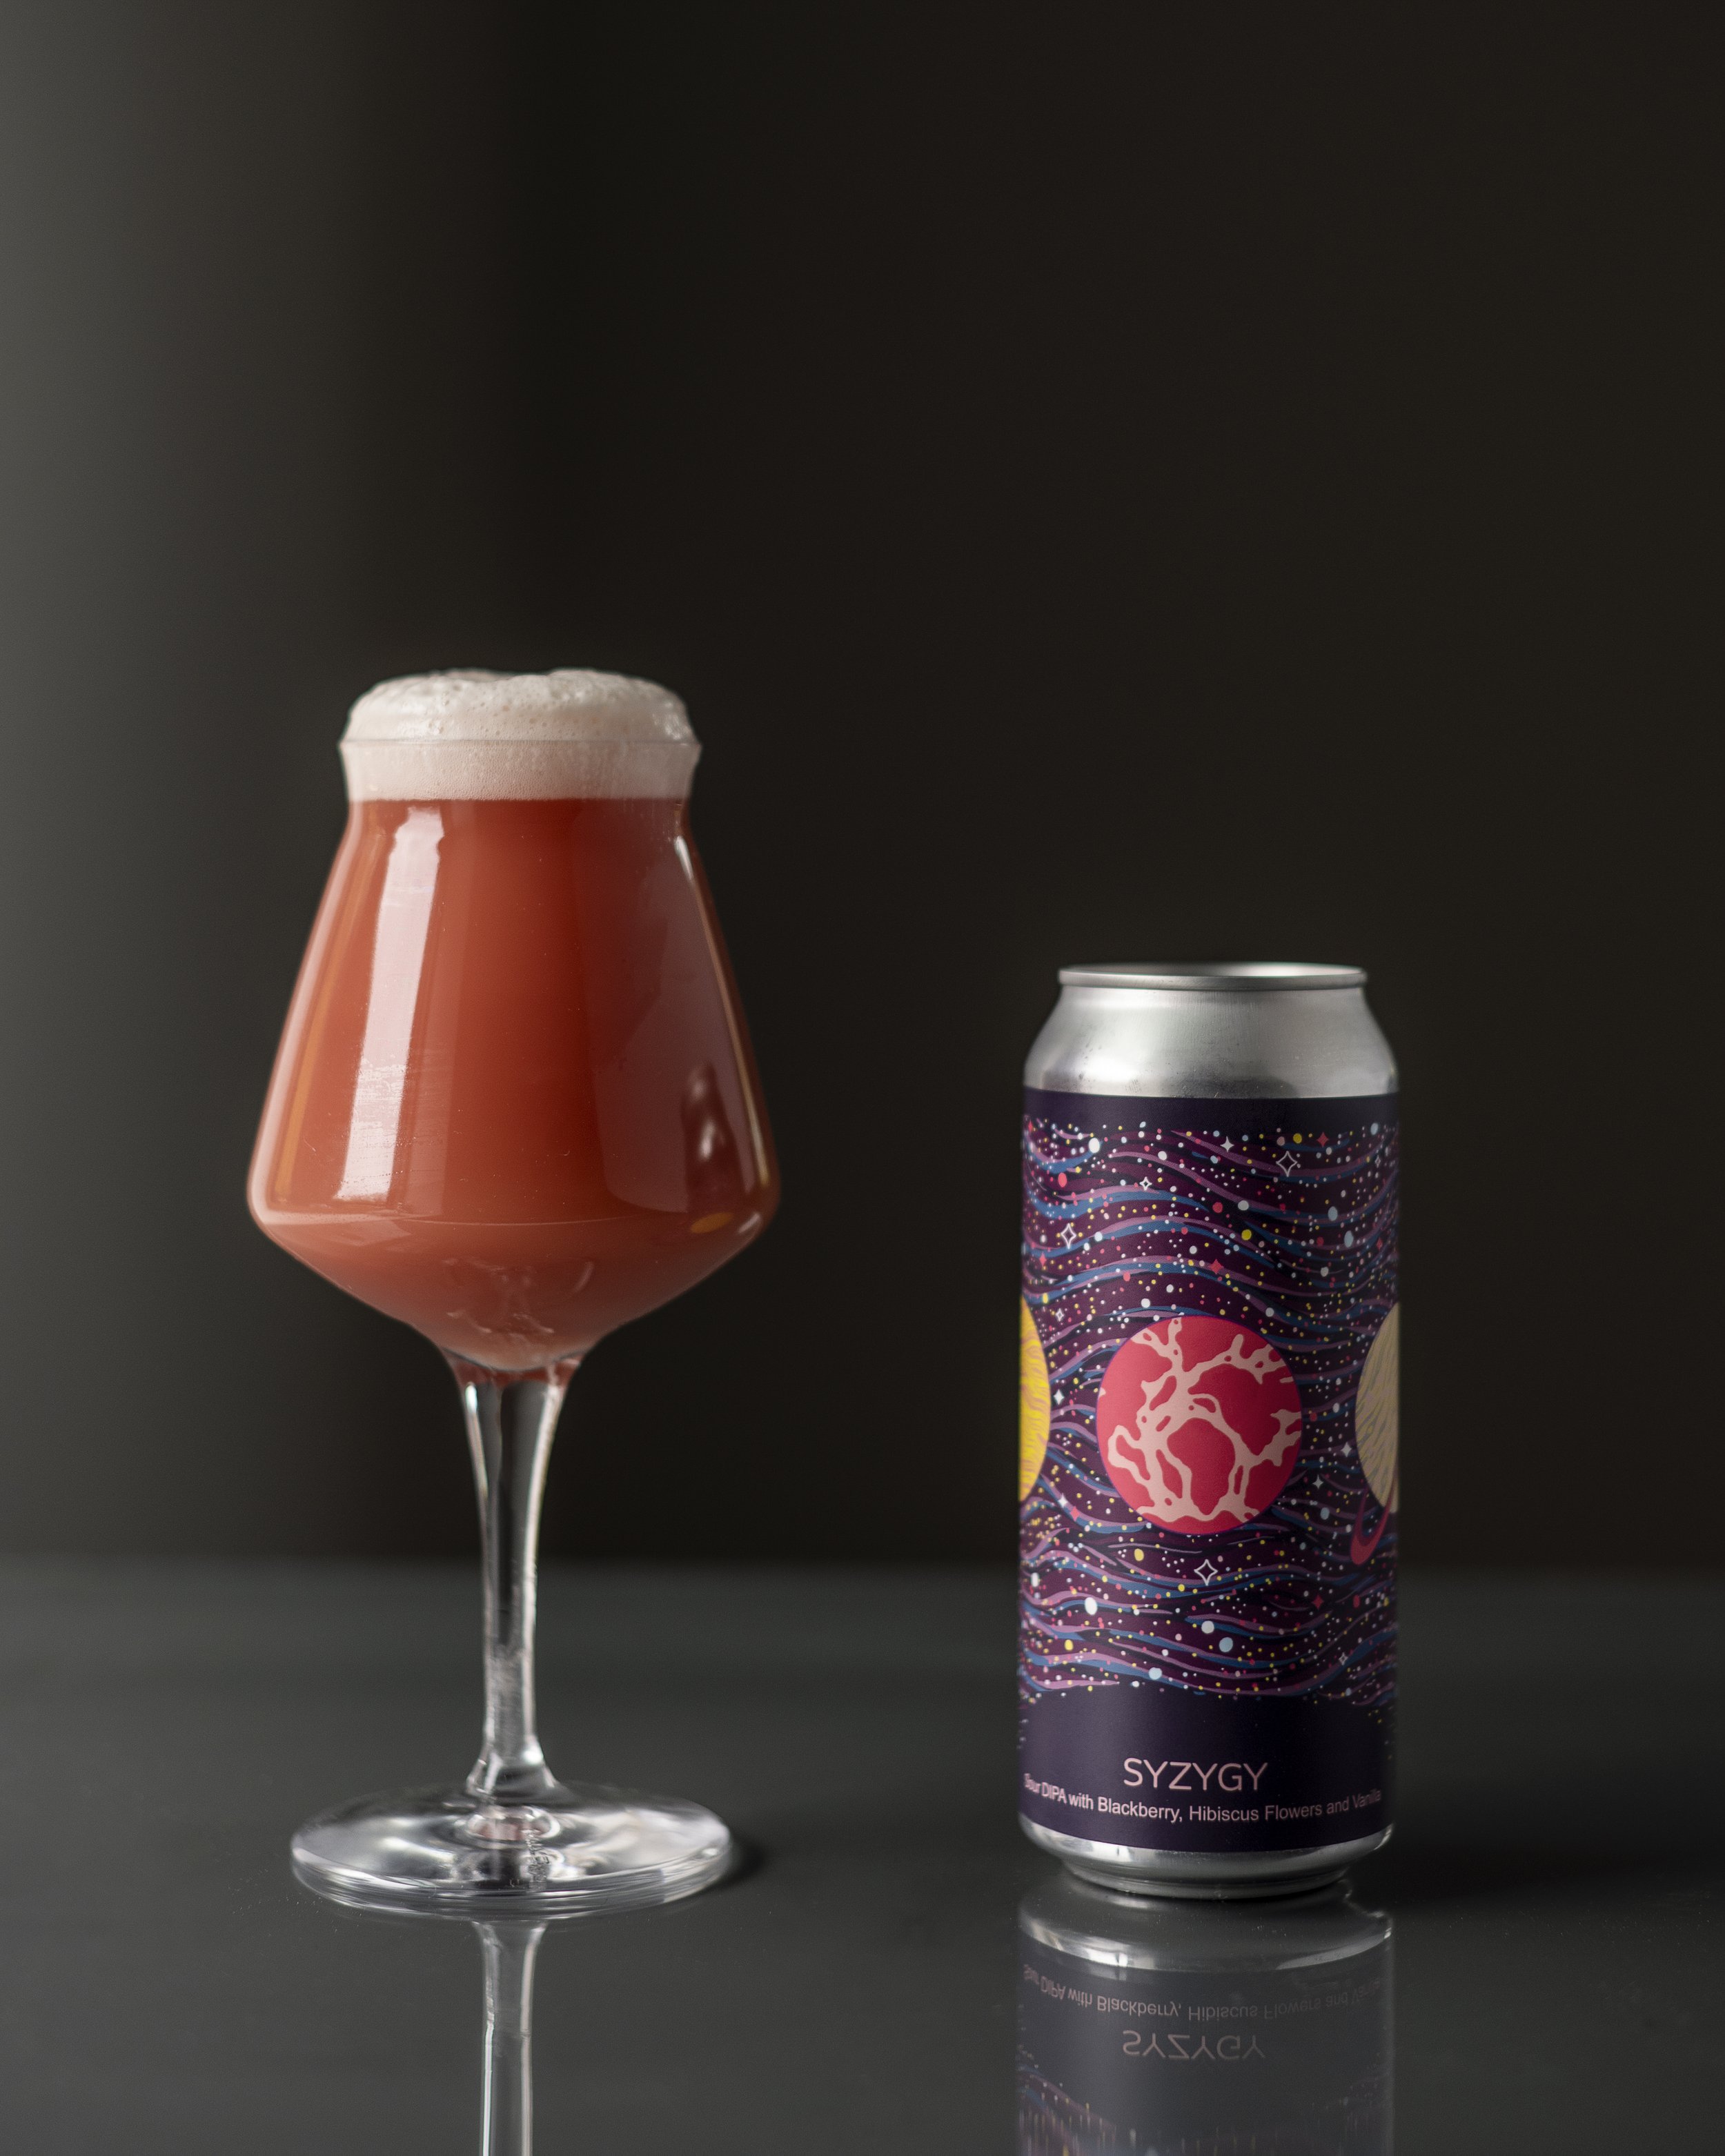 Hitchhiker Brewing - Whole Punch: Peaches and Cream is the latest beer in  our Milkshake IPA series. This beer was brewed with Milk Sugar and  conditioned on Peaches and Vanilla. Order now